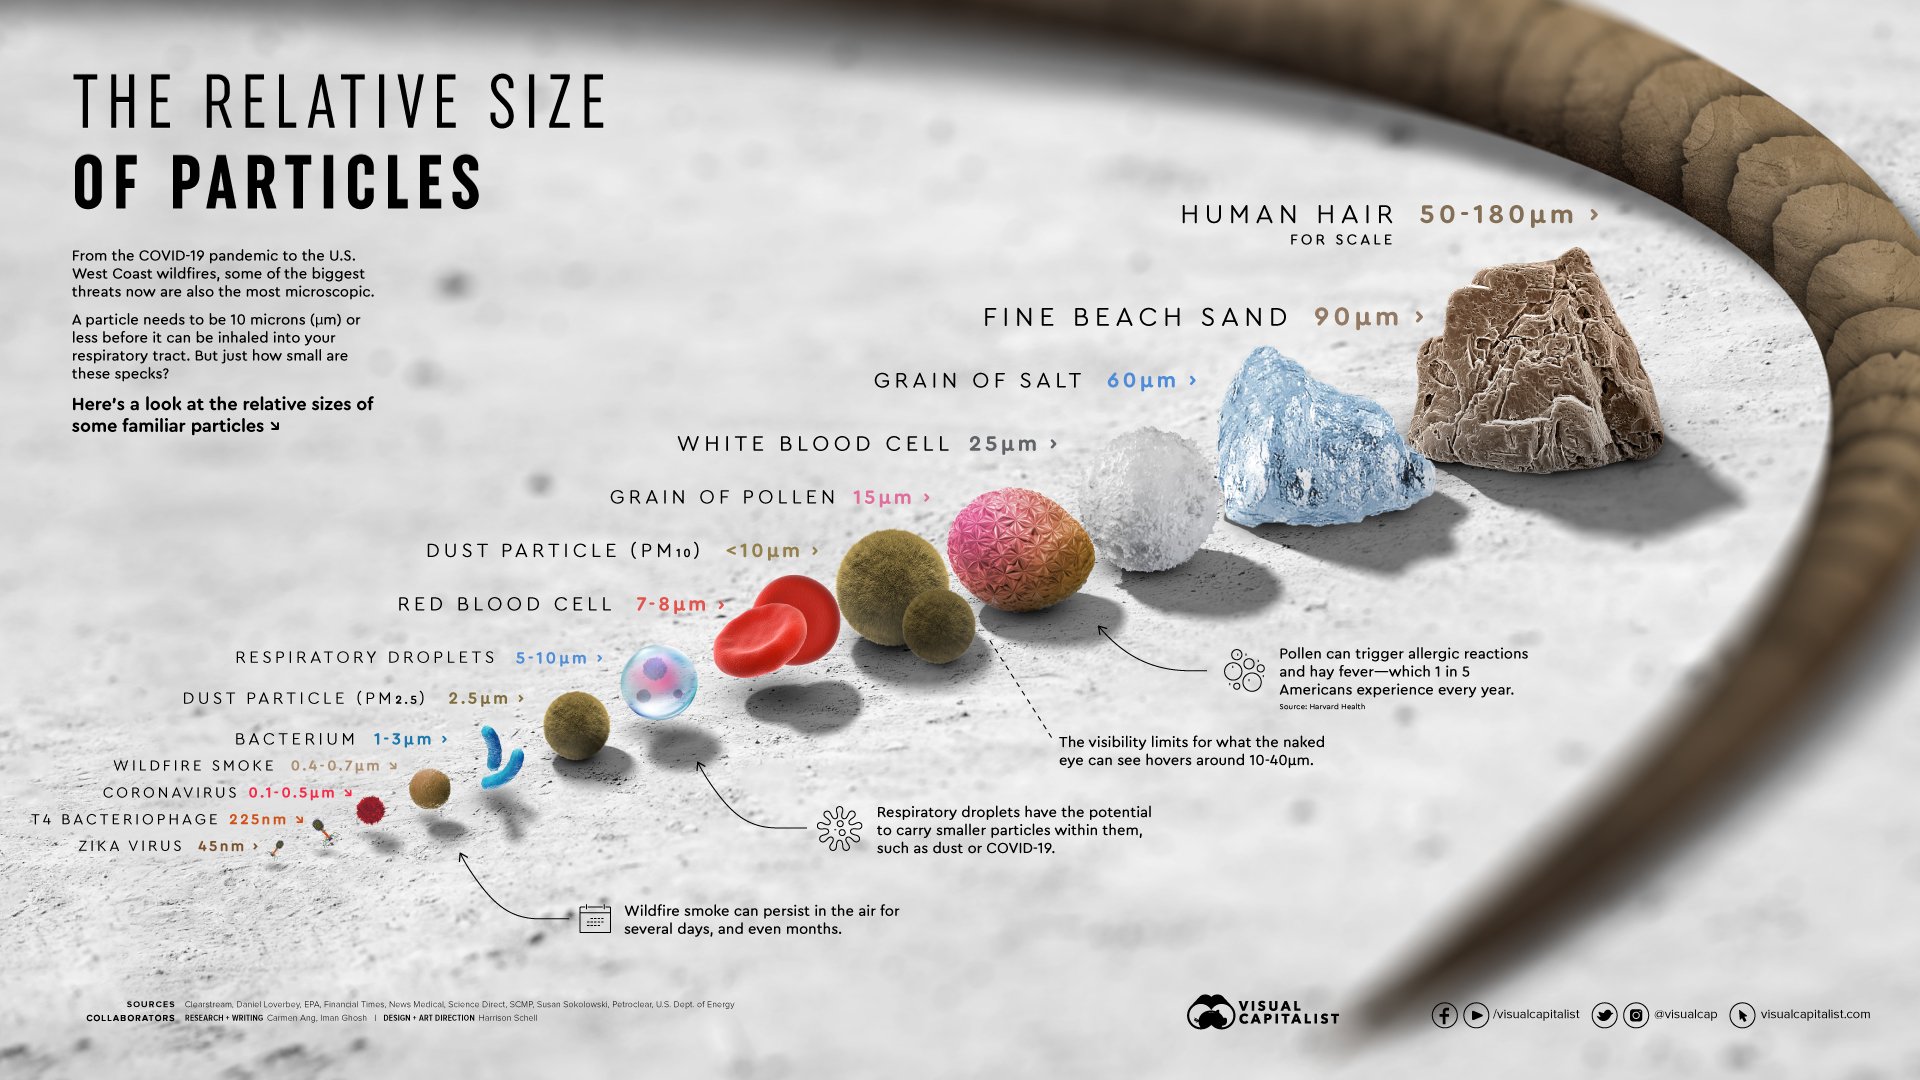 The relative size of particles, by Daniel Loverbey